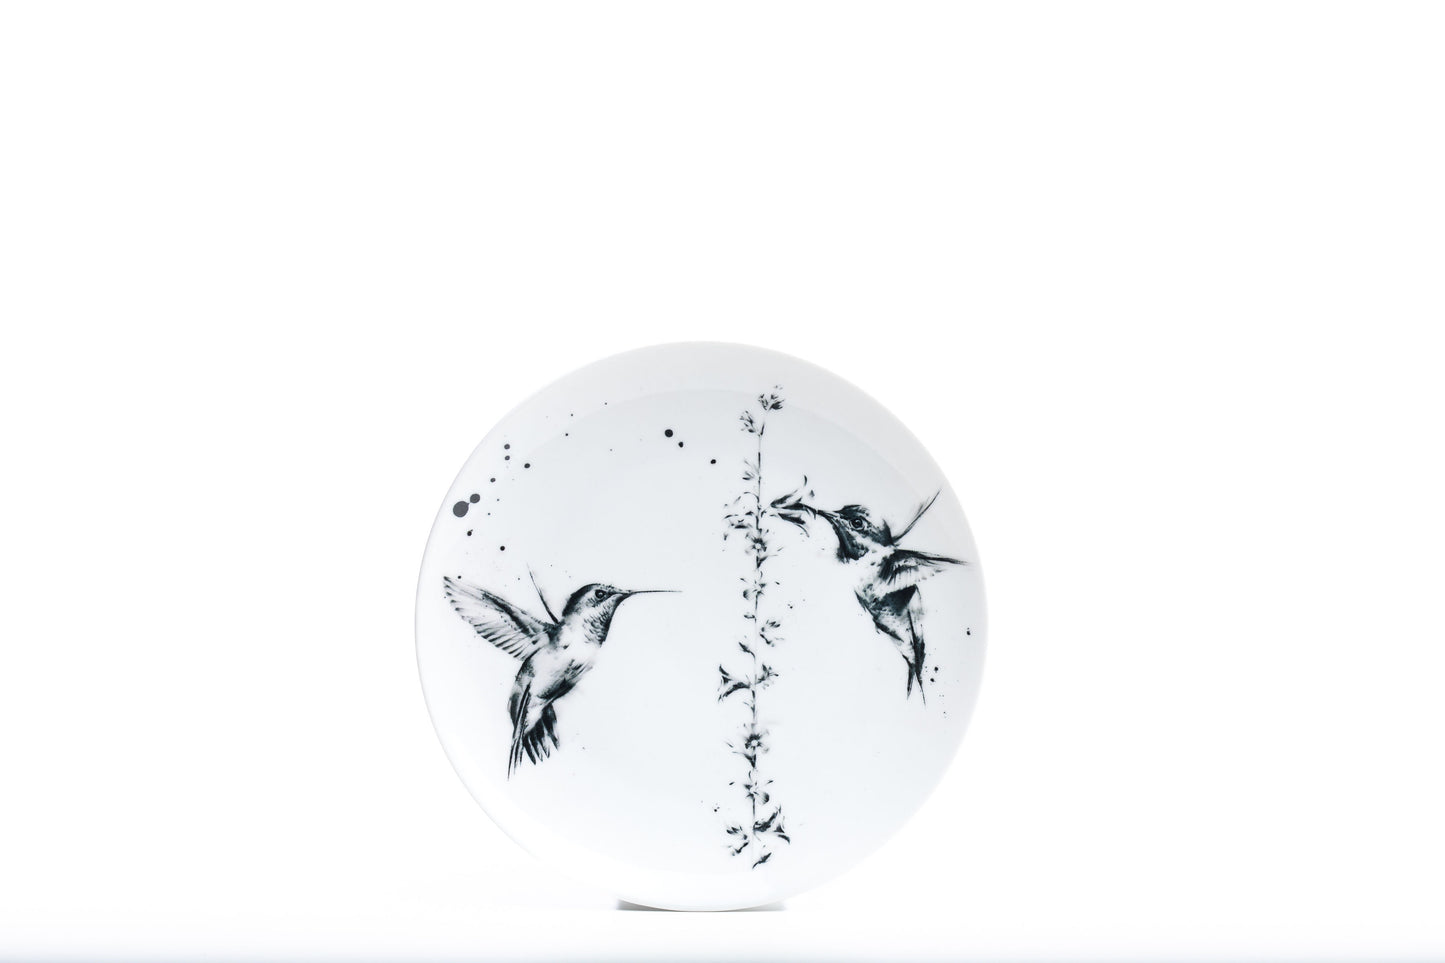 8" White coupe porcelain salad plate with two hummingbirds and a flower illustration and black ink splatter product photo on white background